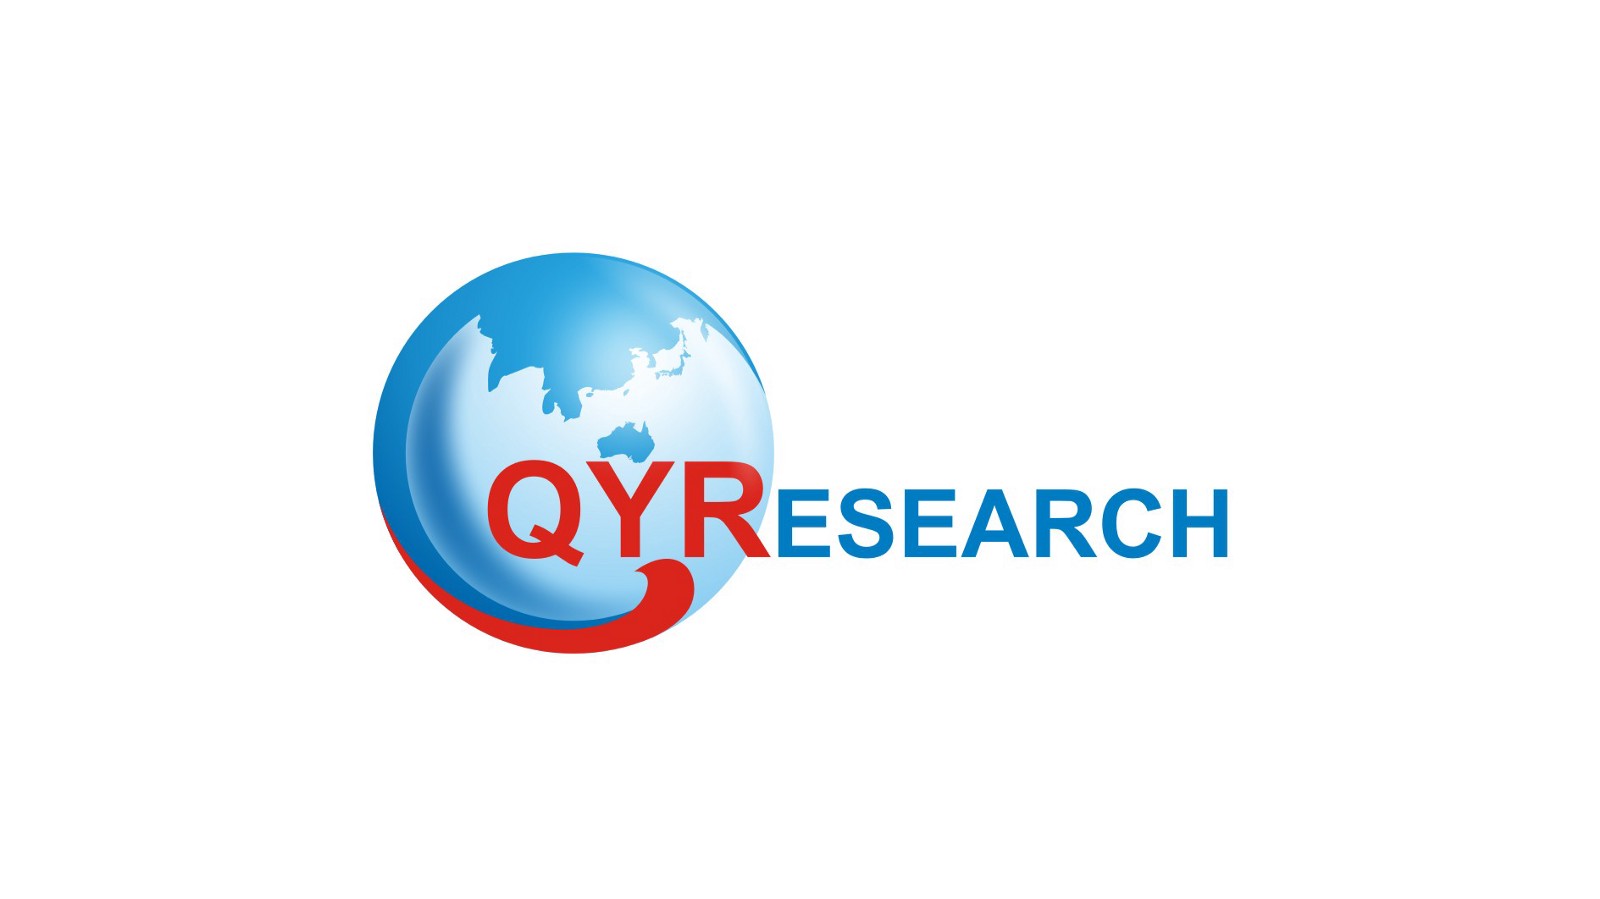 Global Sandalwood Oil Market to Witness Growth Acceleration During 2019-2025